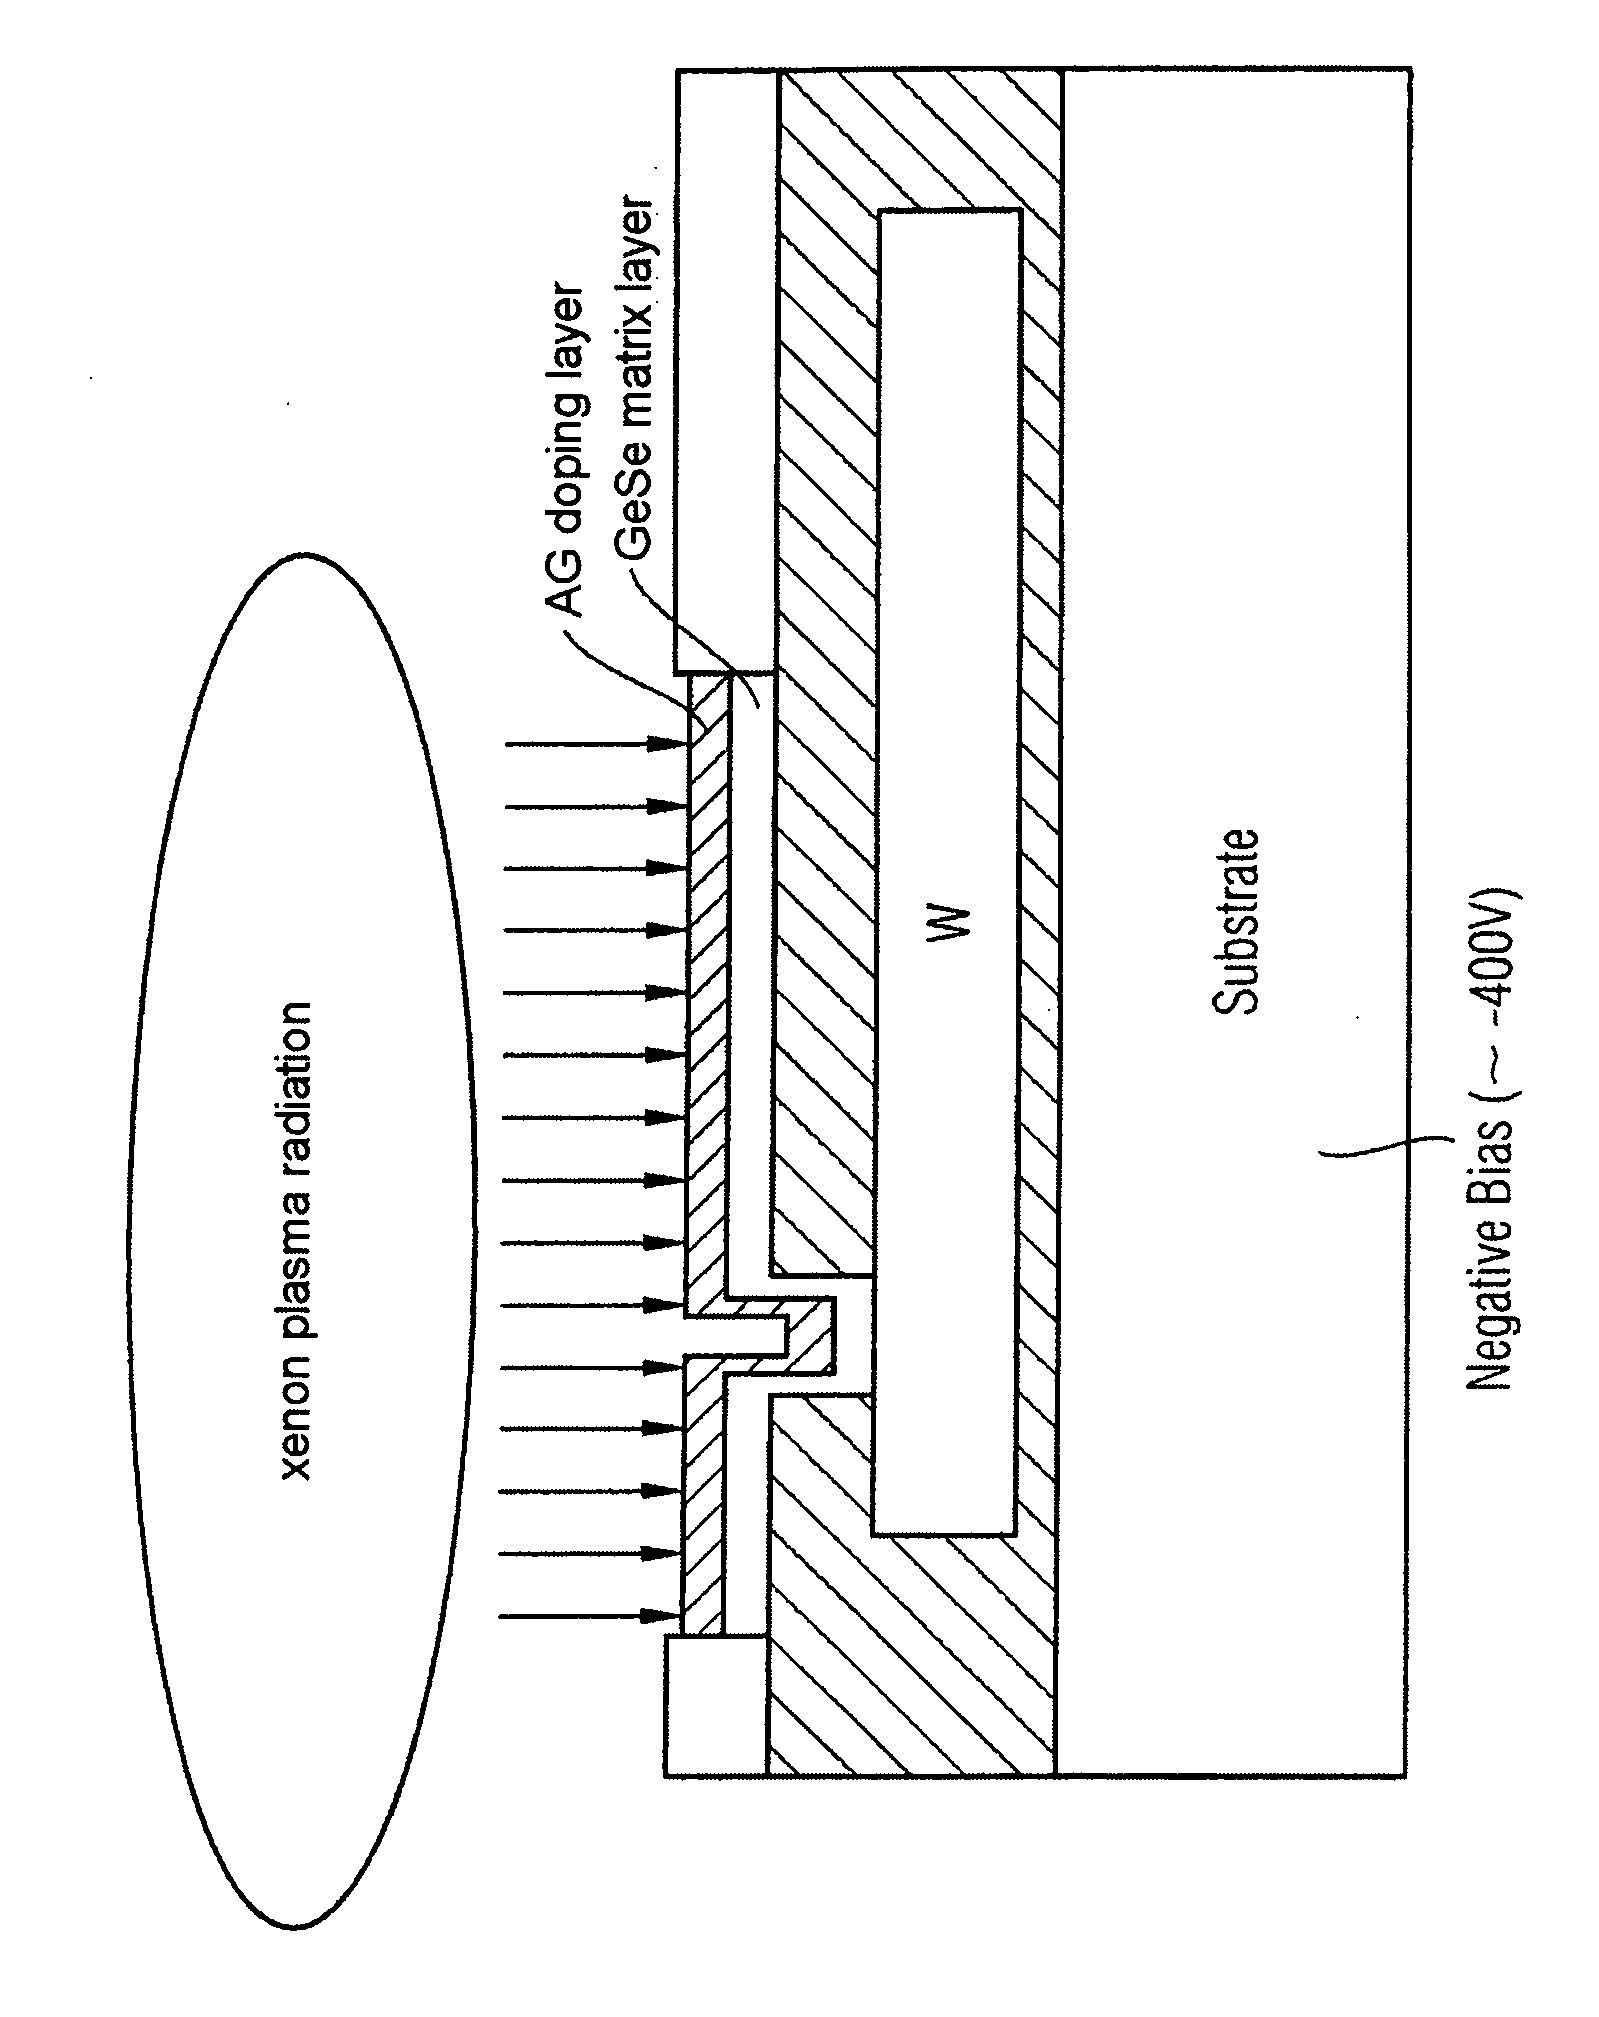 Method for fabricating a resistively switching nonvolatile memory cell